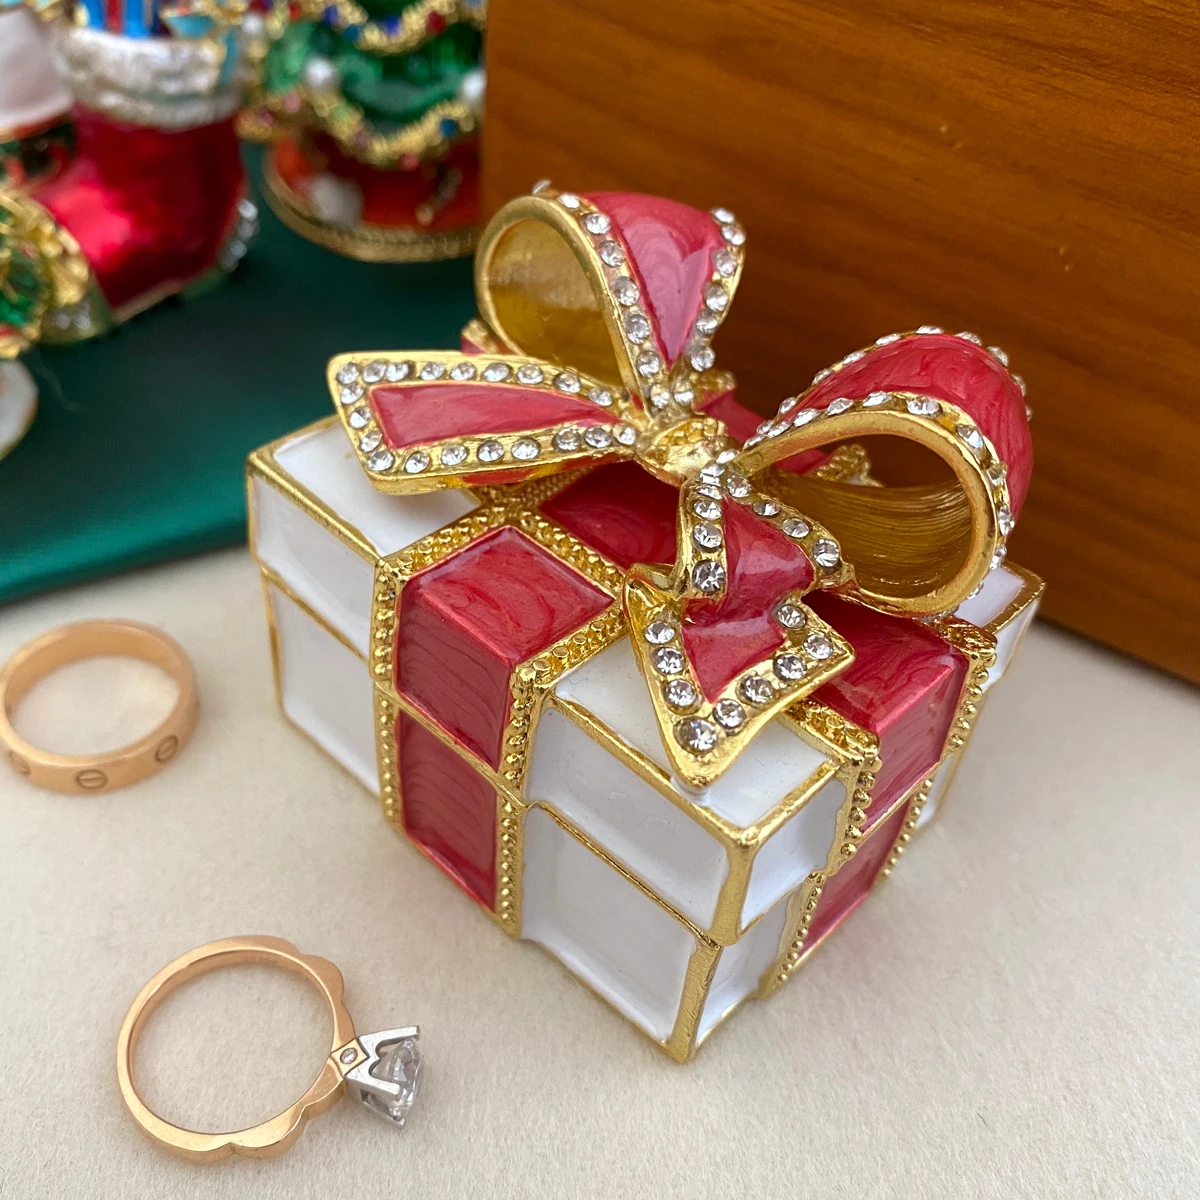 Mysterious Gift Box Jewelry Trinket Box Hinged Metal Enameled Figurines Collectible Wedding X'Mas Gift Ring Holders Organizer